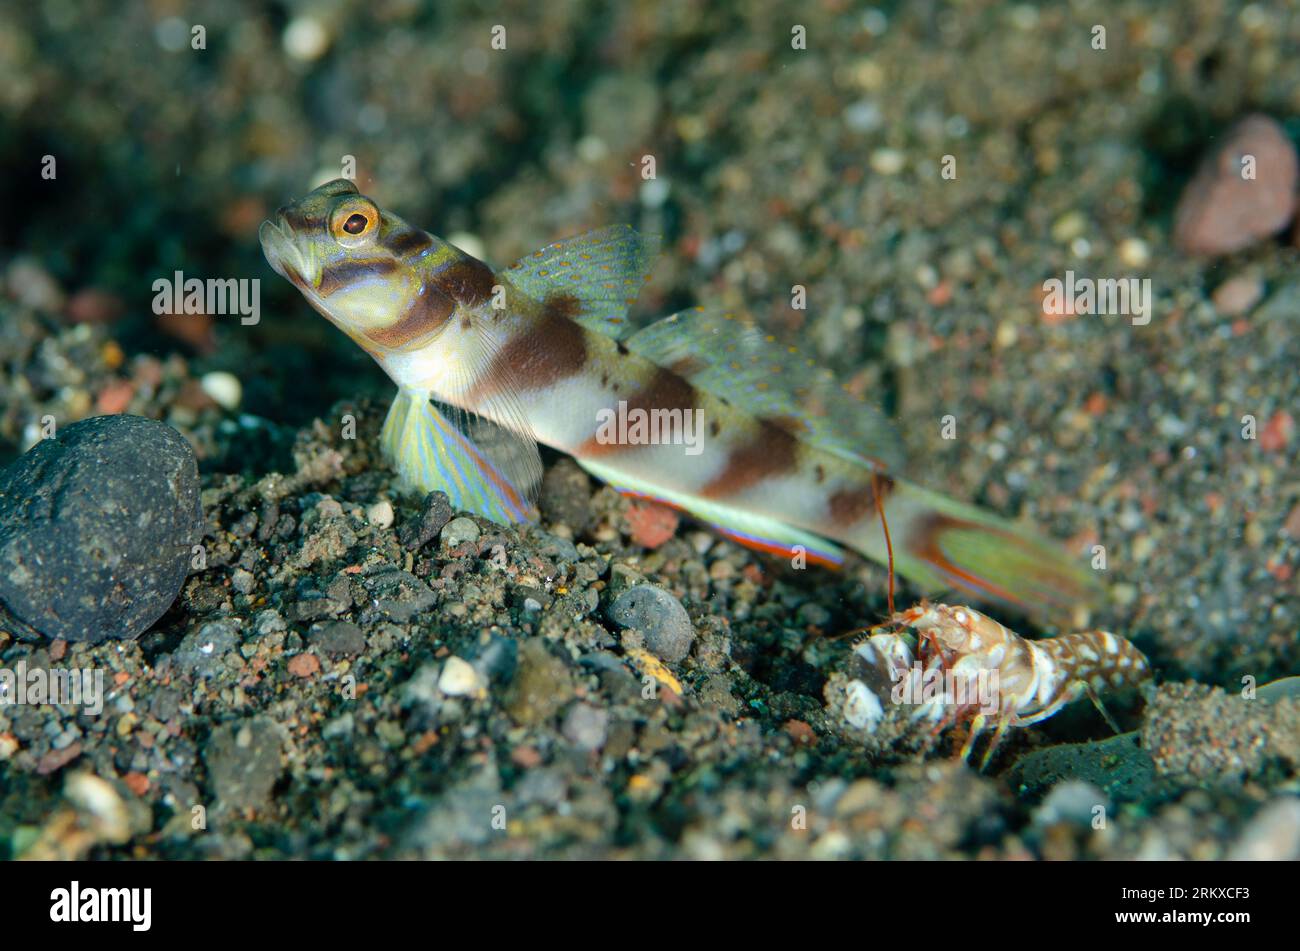 Slantbar Shrimpgoby, Amblyeleotris diagonalis, with Tiger Snapping Shrimp, Alpheus bellulus, cleaning hole entrance on sand, Ghost Bay dive site,Amed, Stock Photo